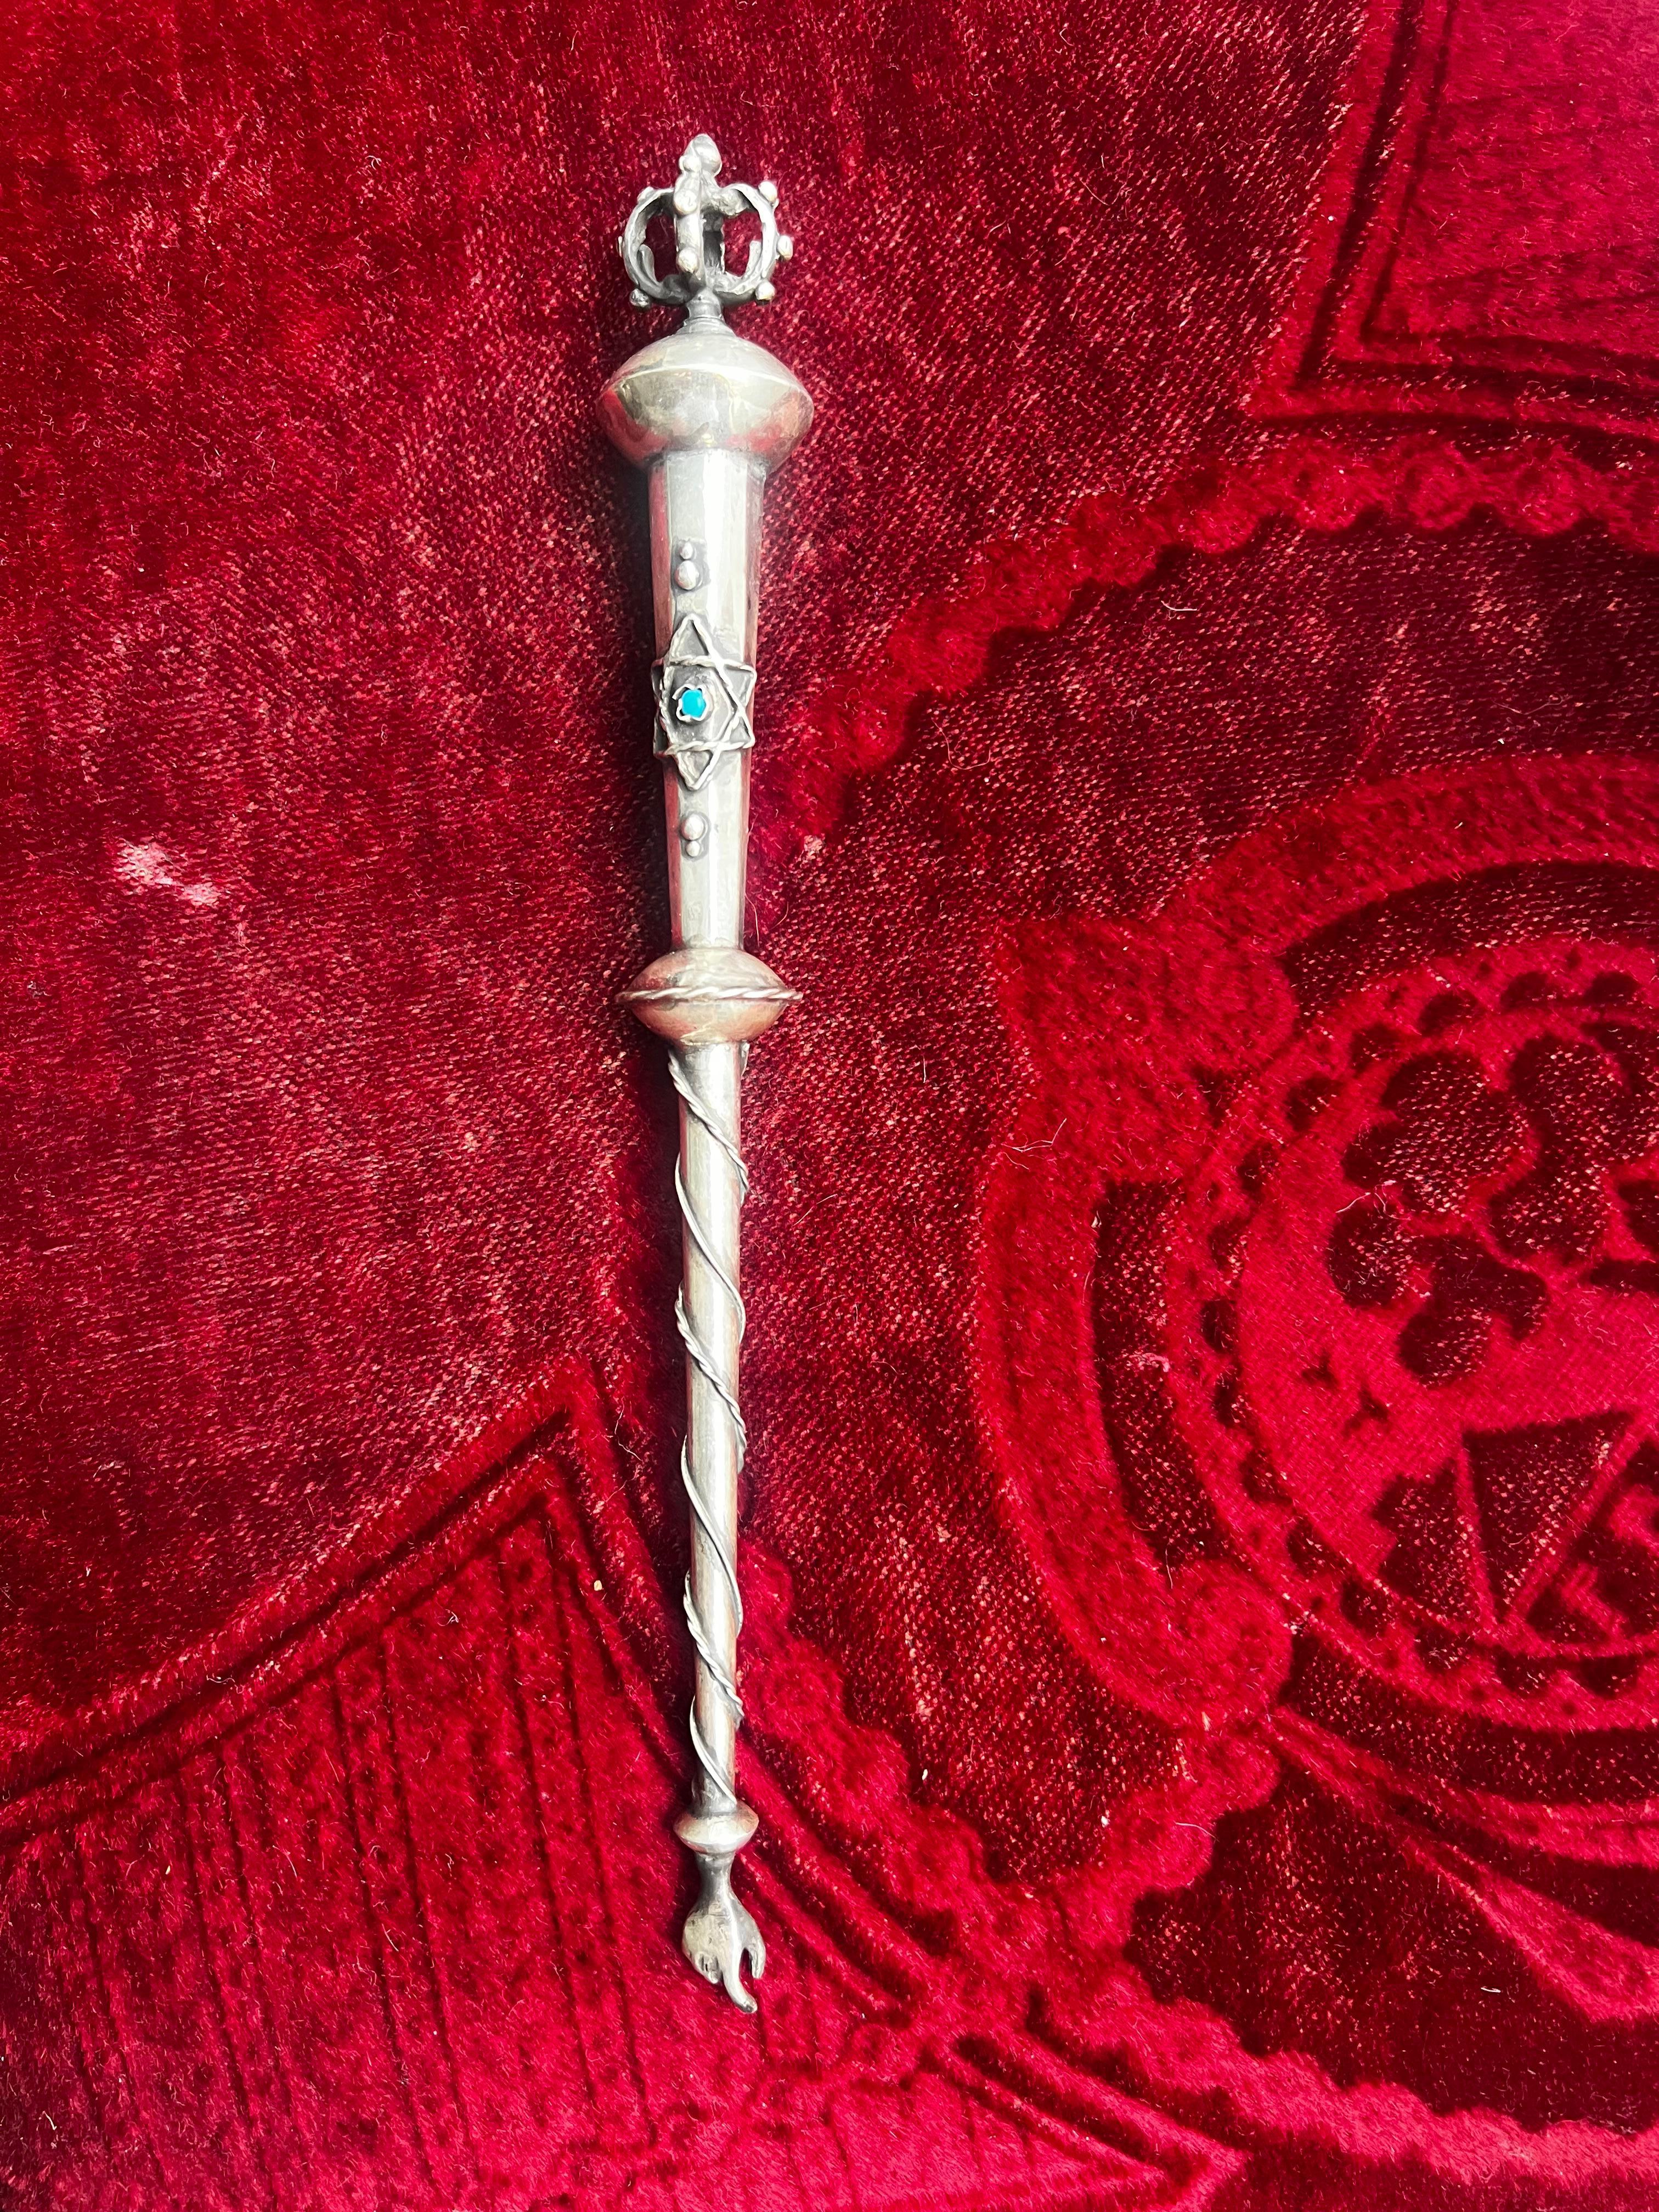 This rare antique sterling silver judaical Yad (literally translated from Hebrew as “hand”) or Torah pointer was found in Vienna and survived among other historical religious items (see our listings ). It has a spiral design on the bottom and on the